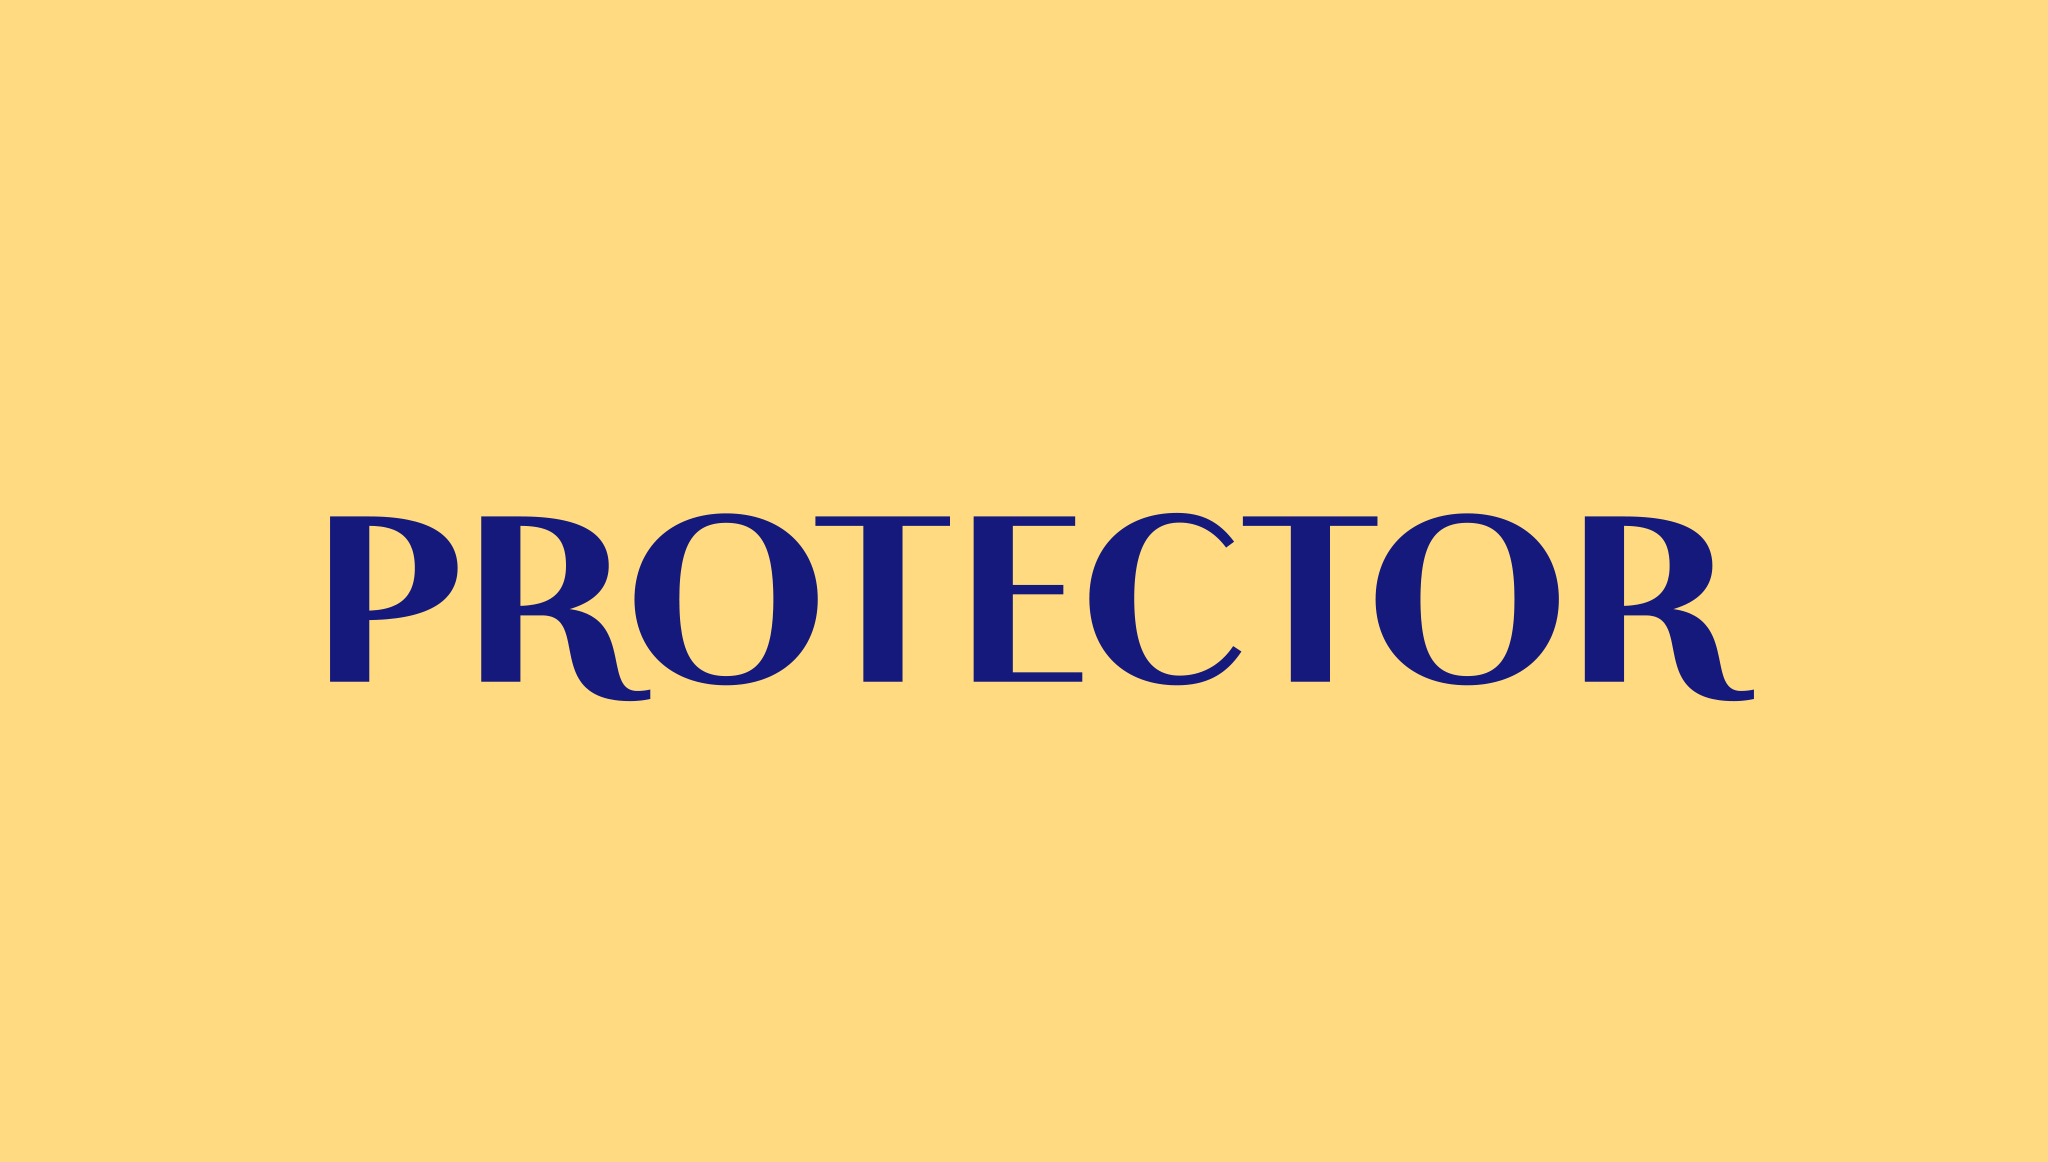 protector